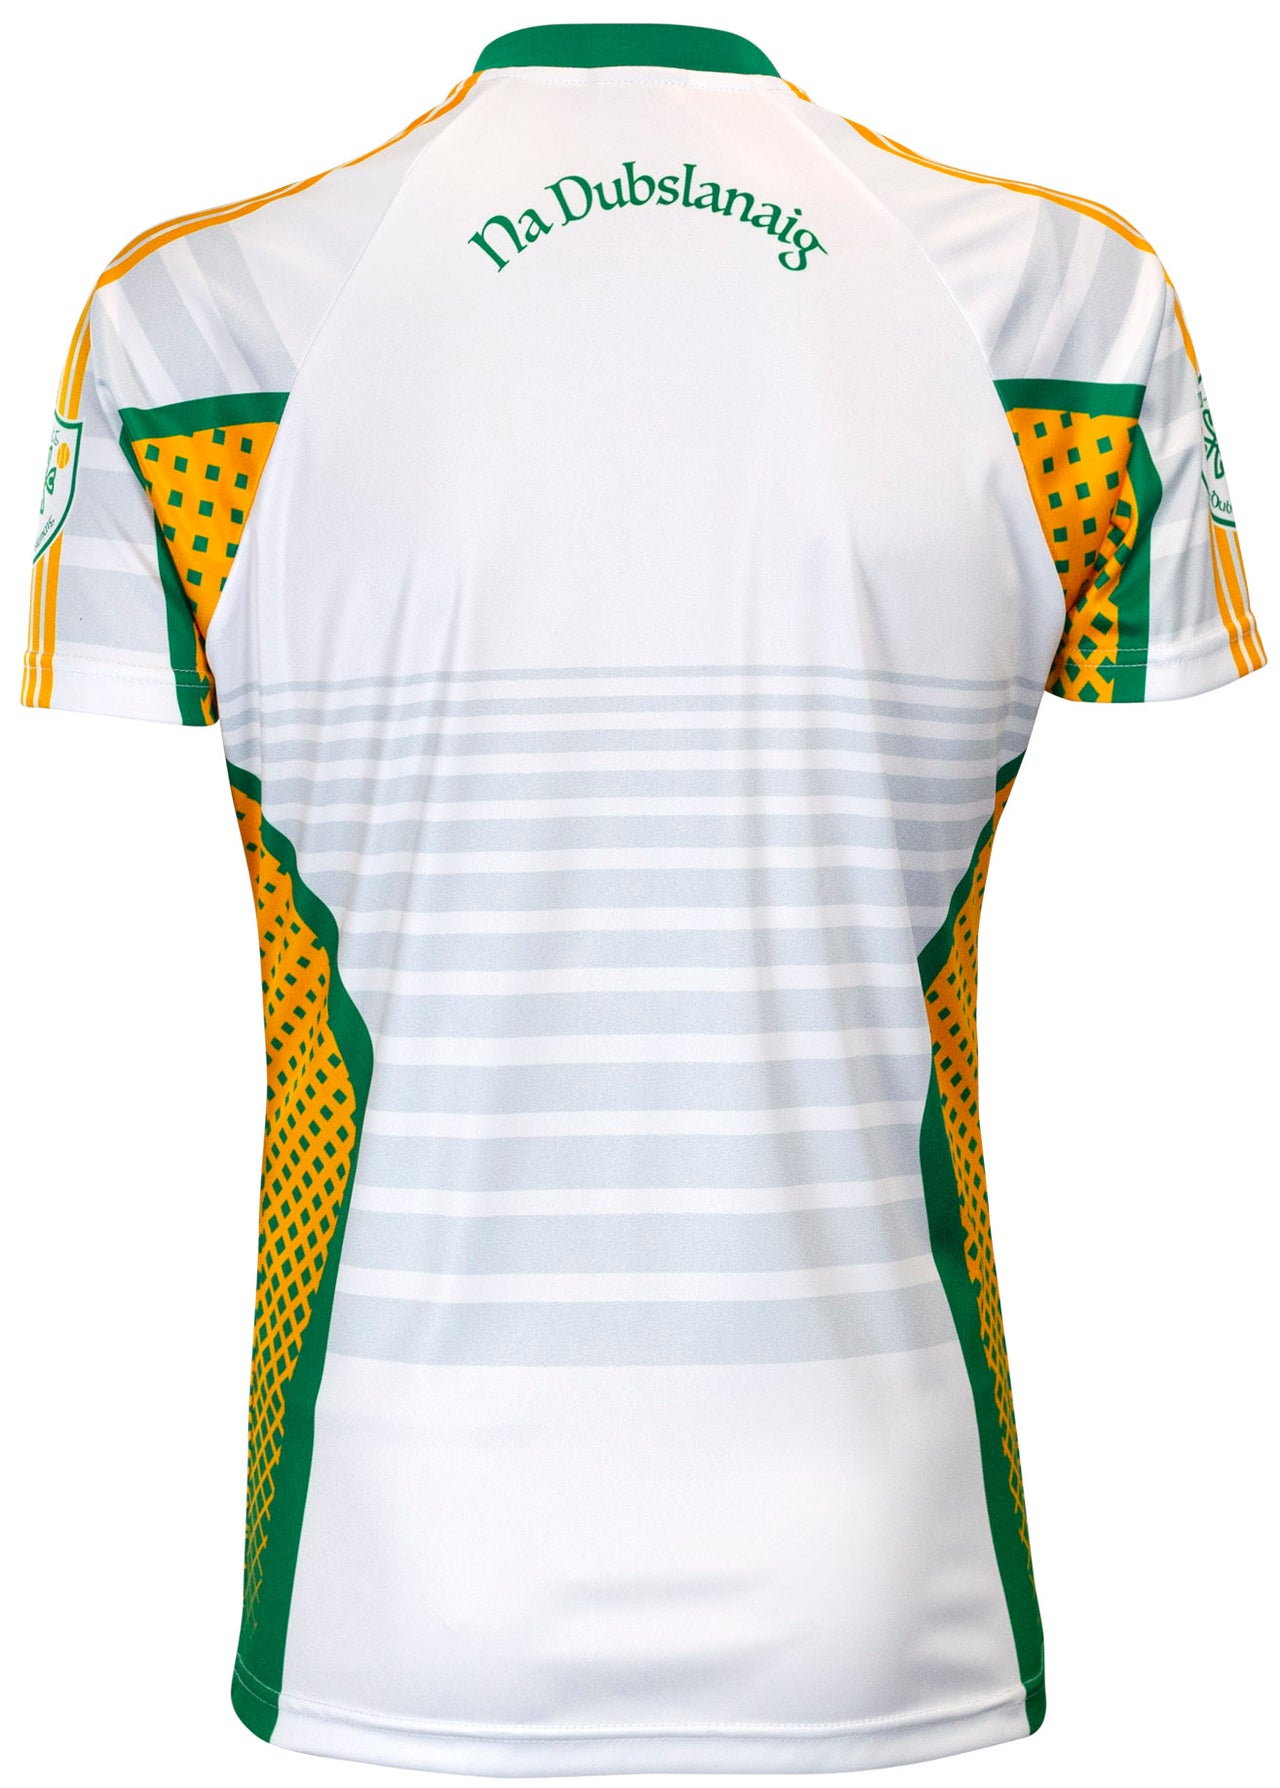 Delanys GAA Home Jersey Player Fit Adult